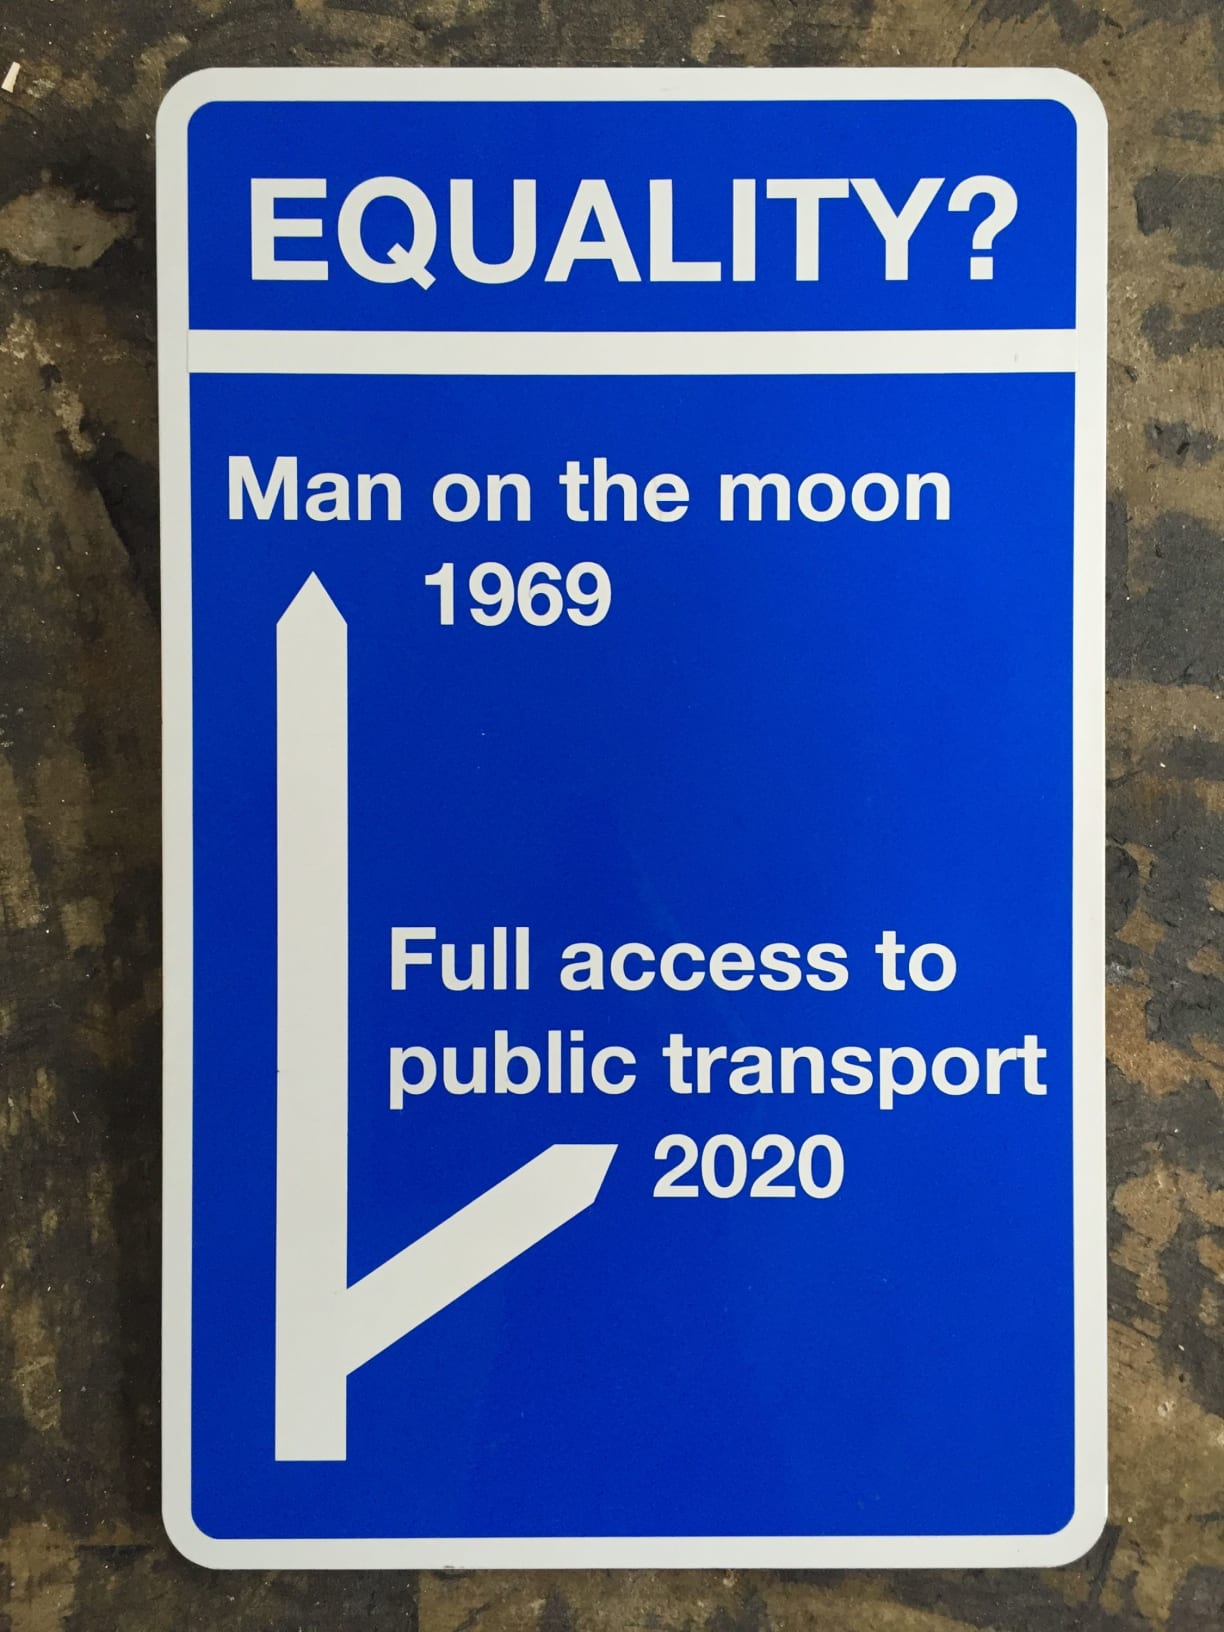 White and blue sign with the title Equality  with a question mark